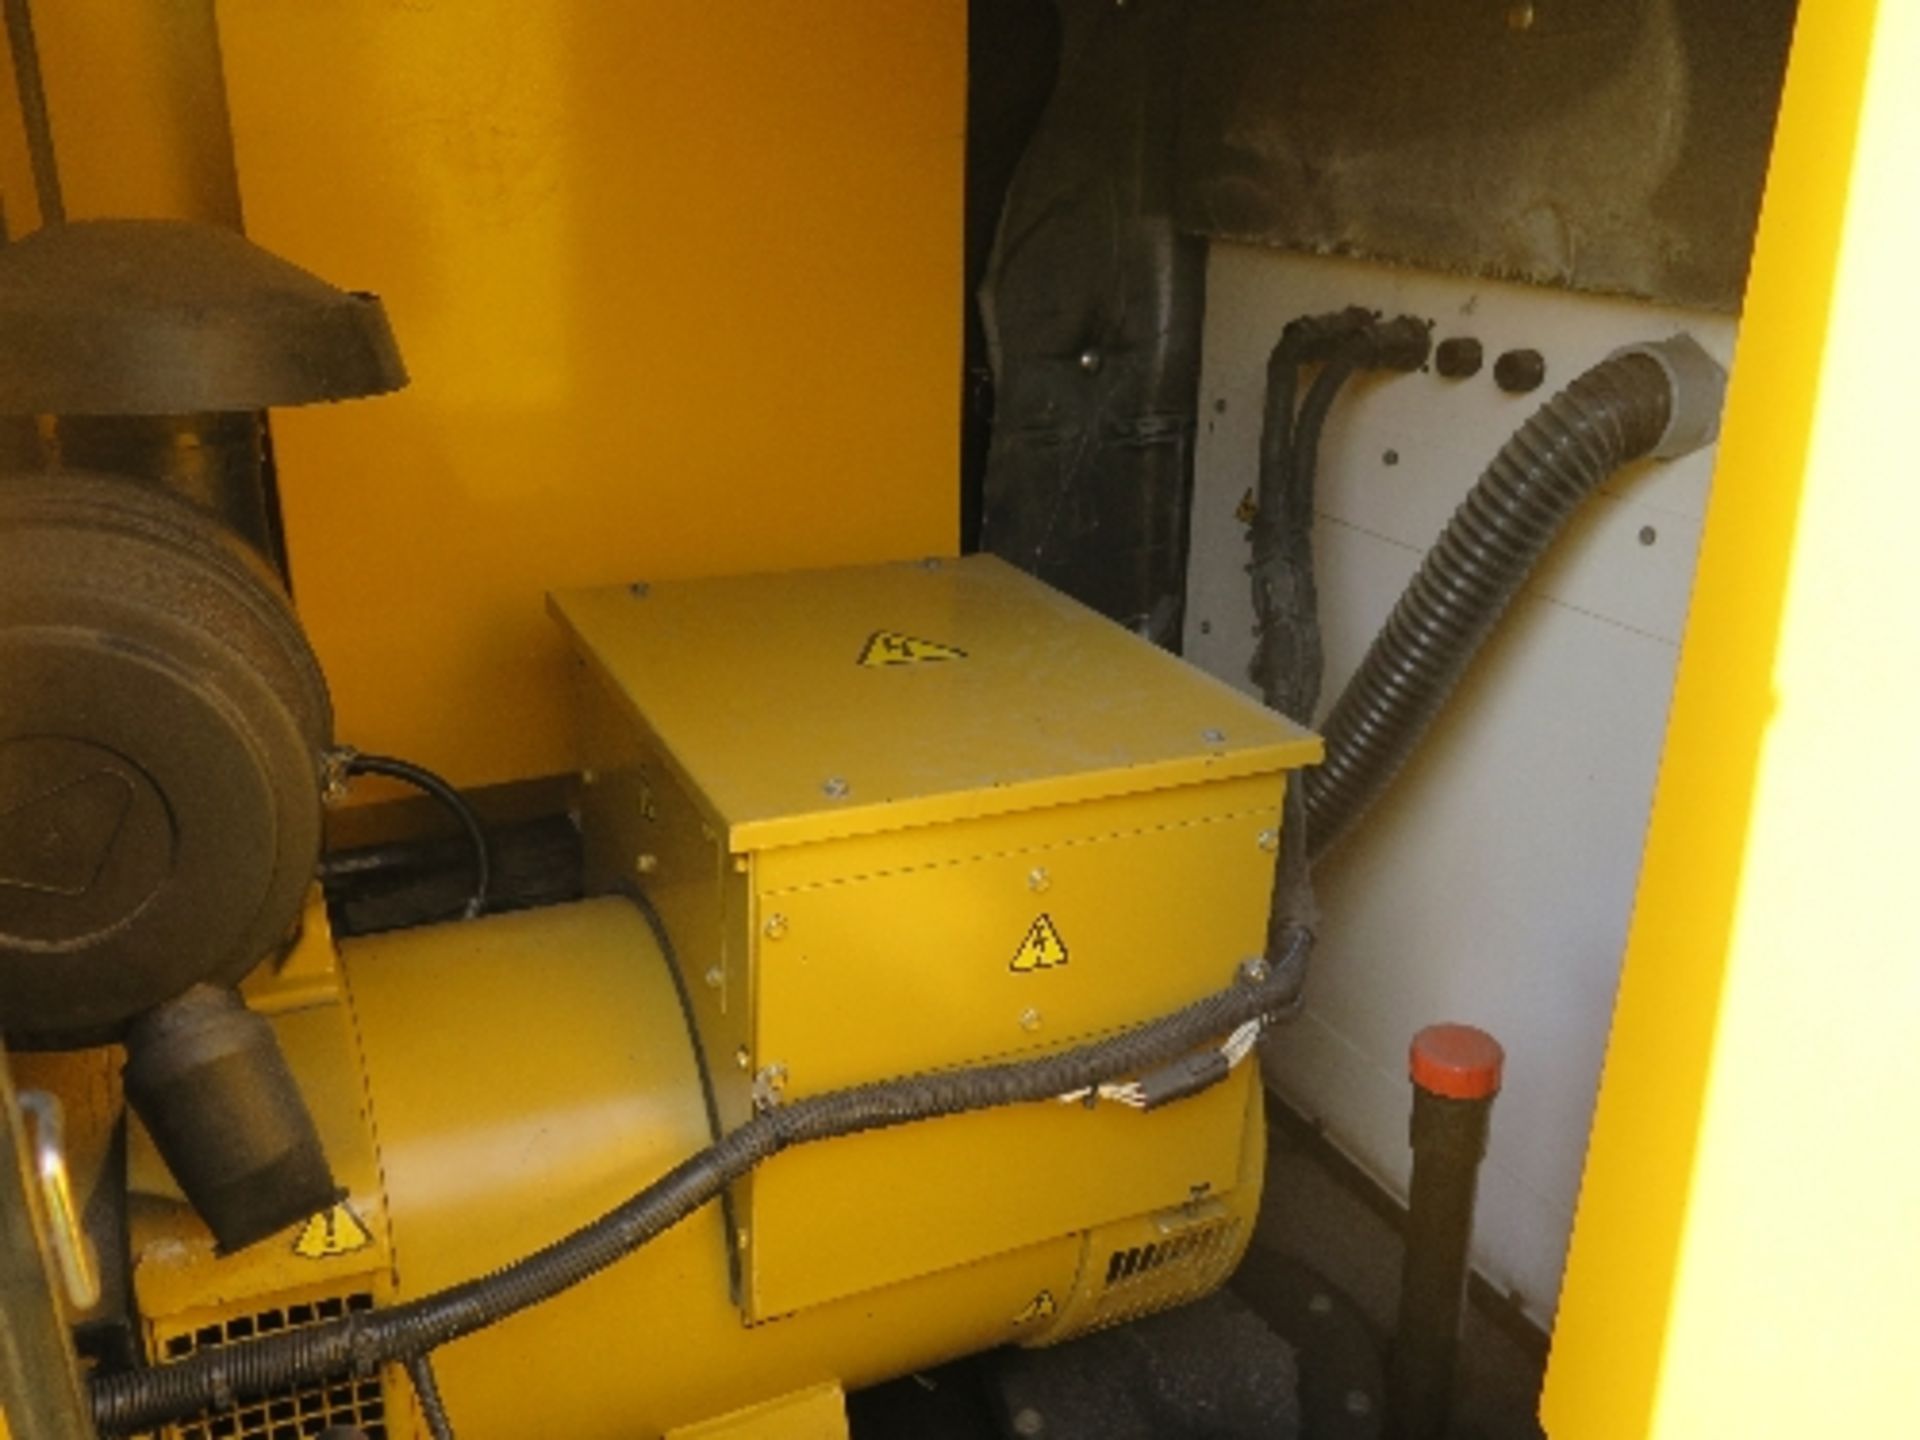 Caterpillar XQE80 generator 15335 hrs 157815
PERKINS - RUNS AND MAKES POWER
ALL LOTS are SOLD AS - Image 4 of 6